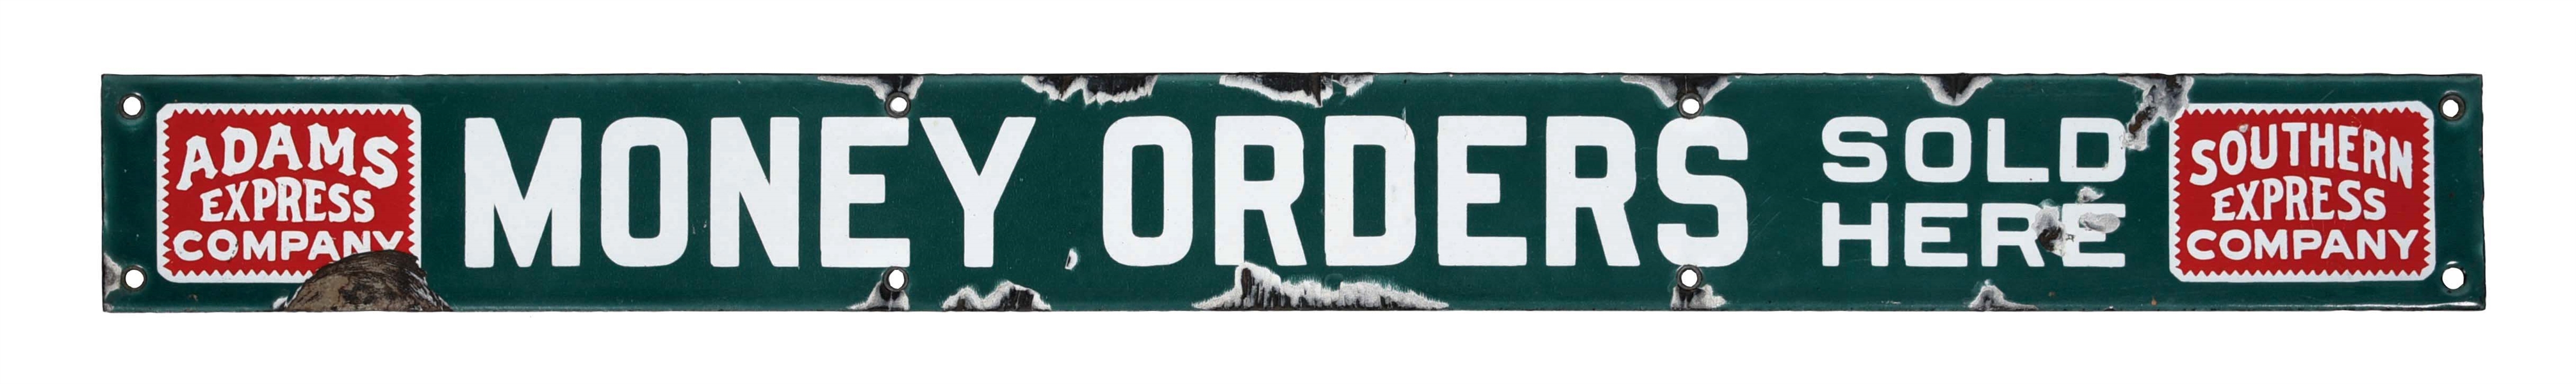 ADAMS & SOUTHERN EXPRESS COMPANY MONEY ORDERS SOLD HERE PORCELAIN STRIP SIGN.